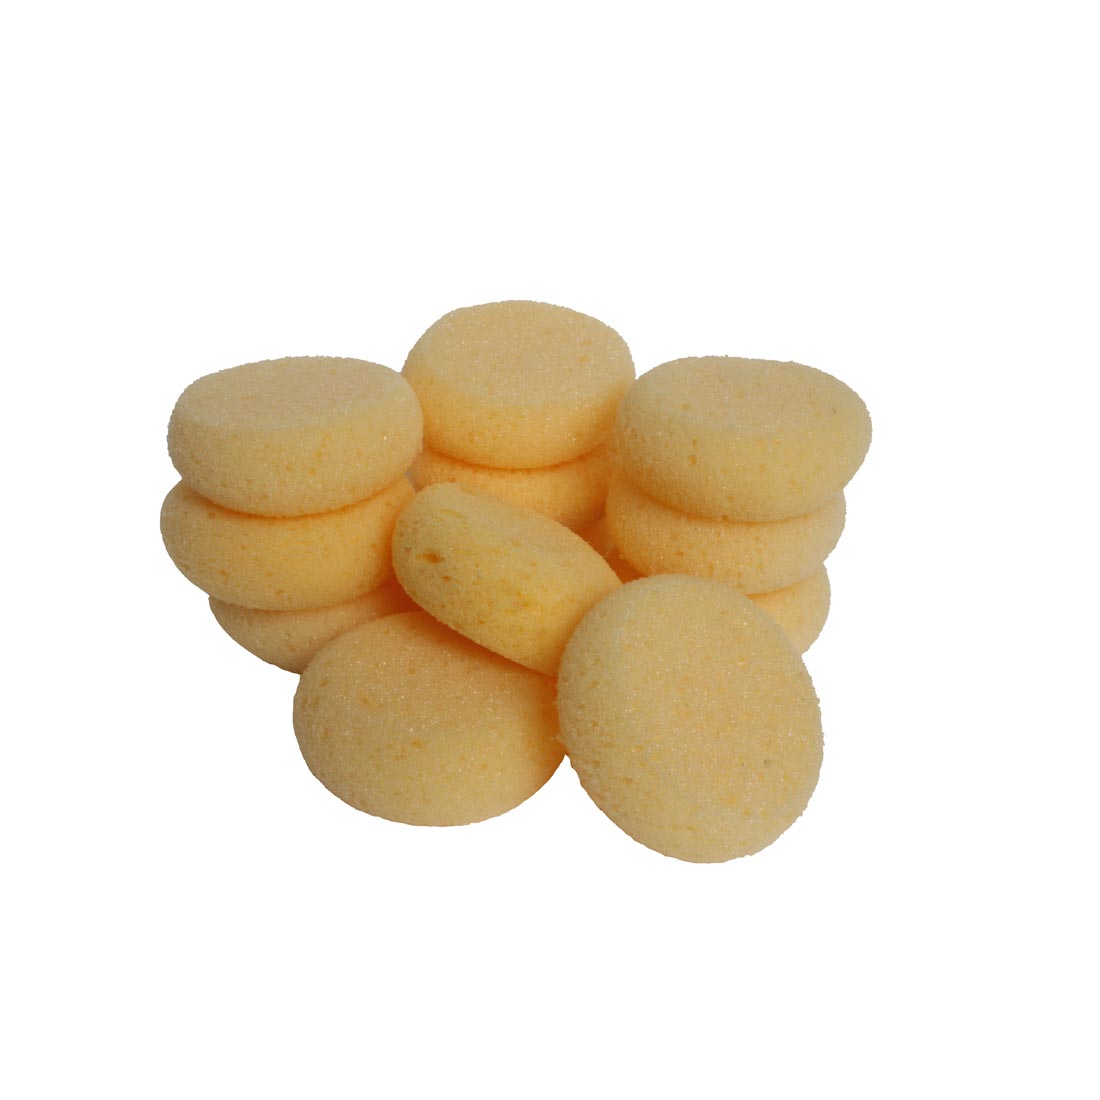 12 Synthetic Hydra Sponges